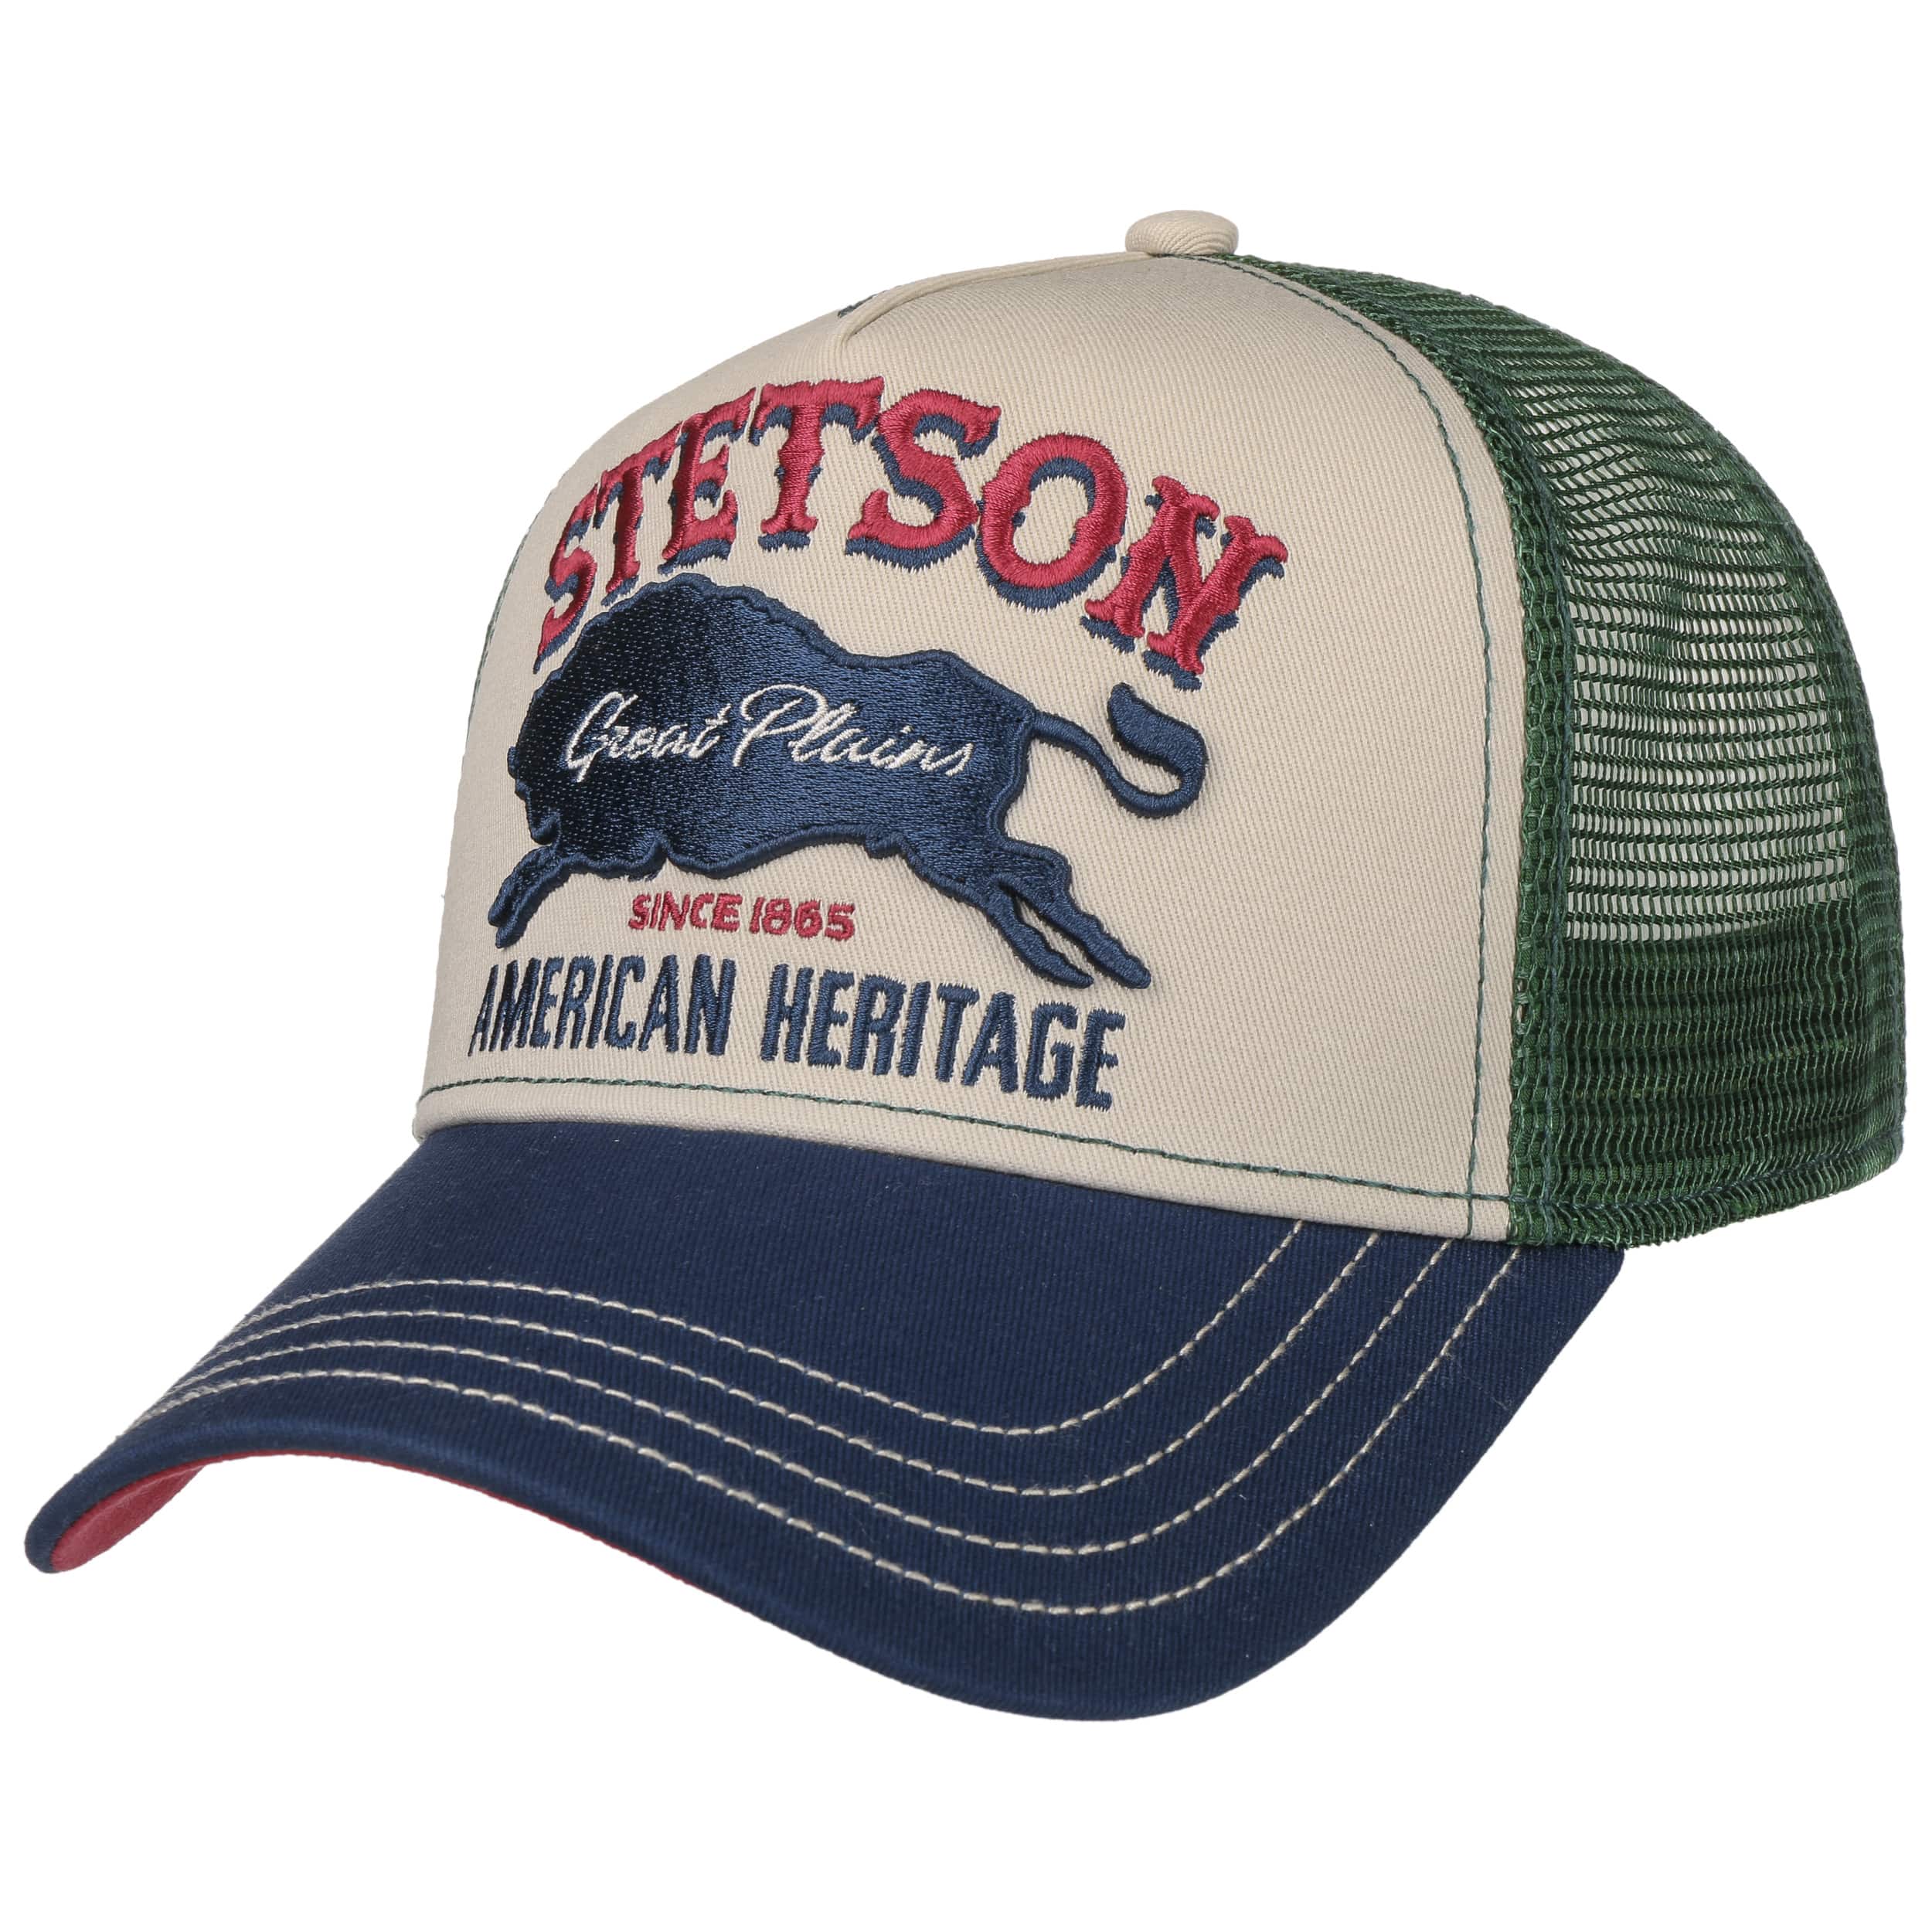 Gorra The Plains by Stetson - 39,00